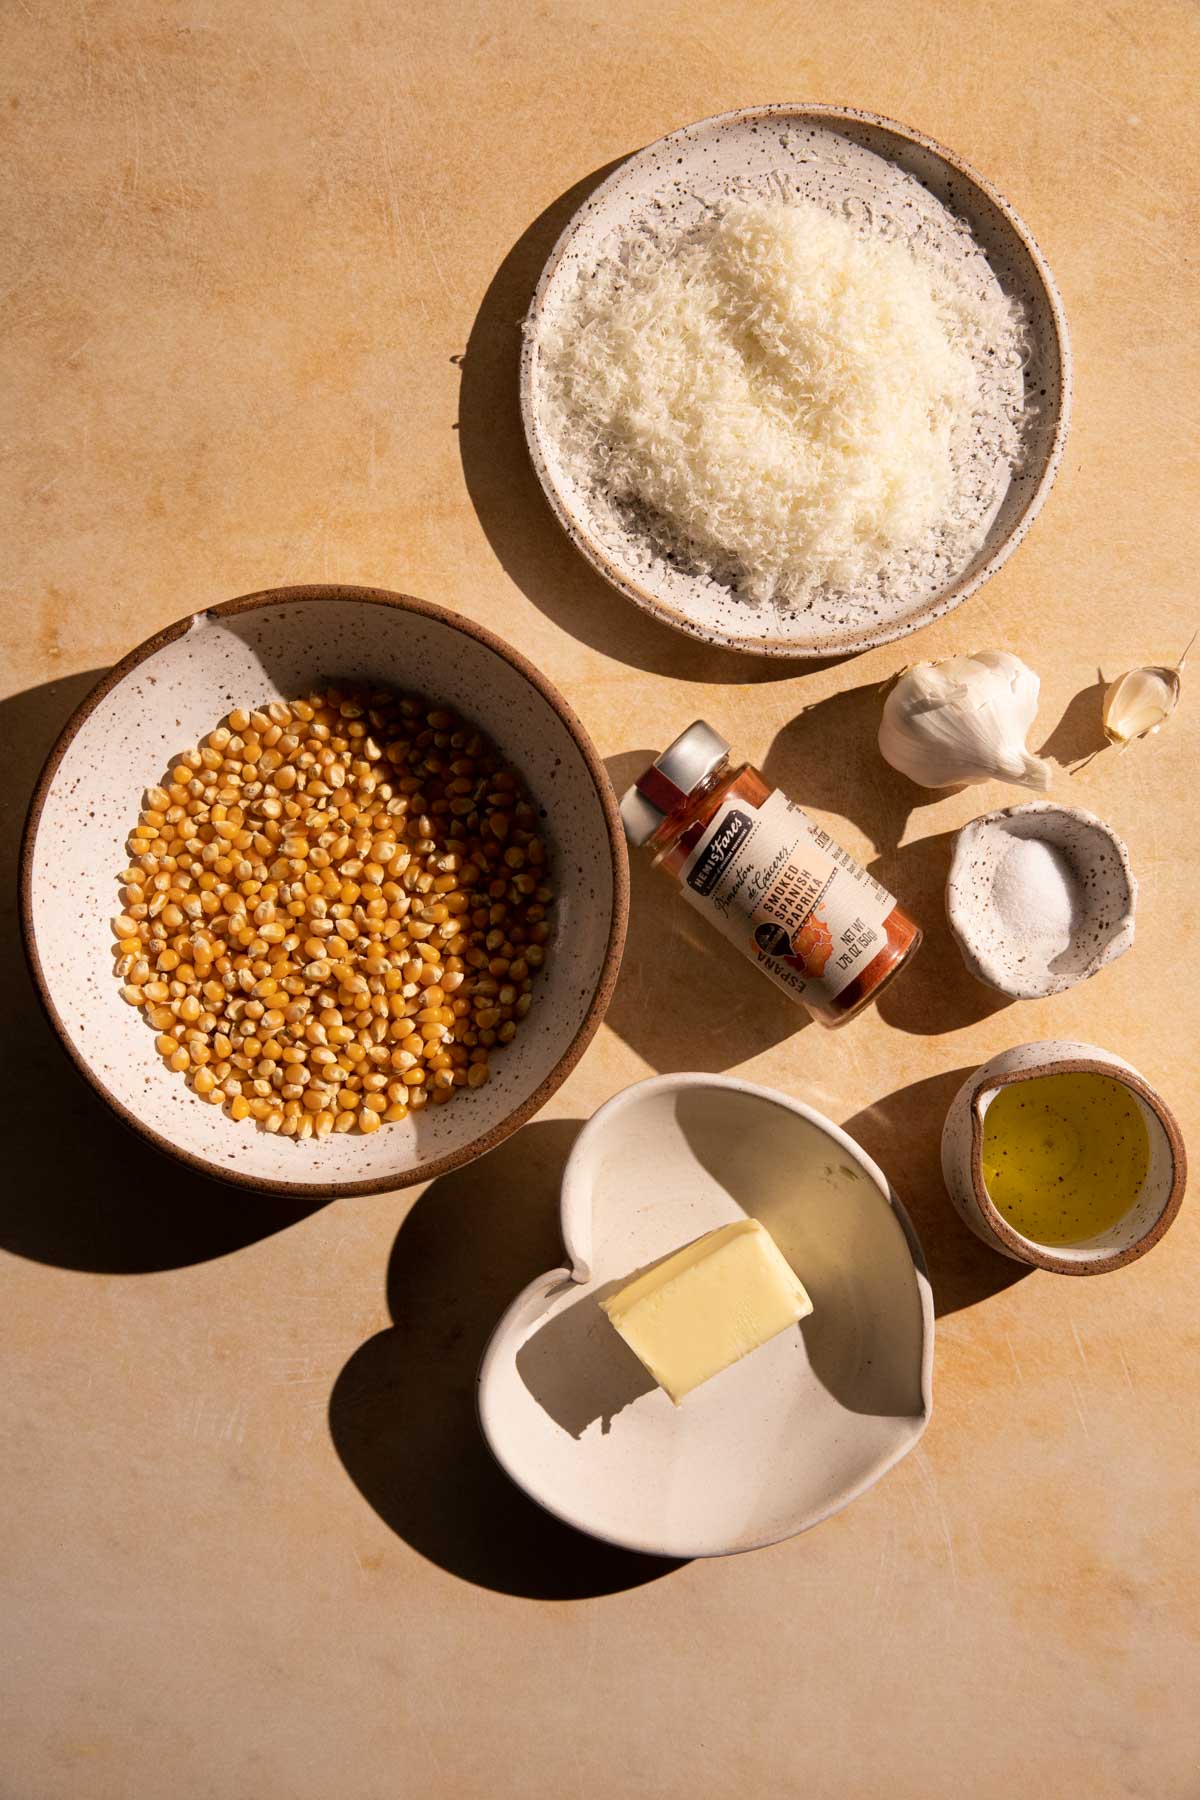 Ingredients in bowls and plates for garlic parmesan popcorn